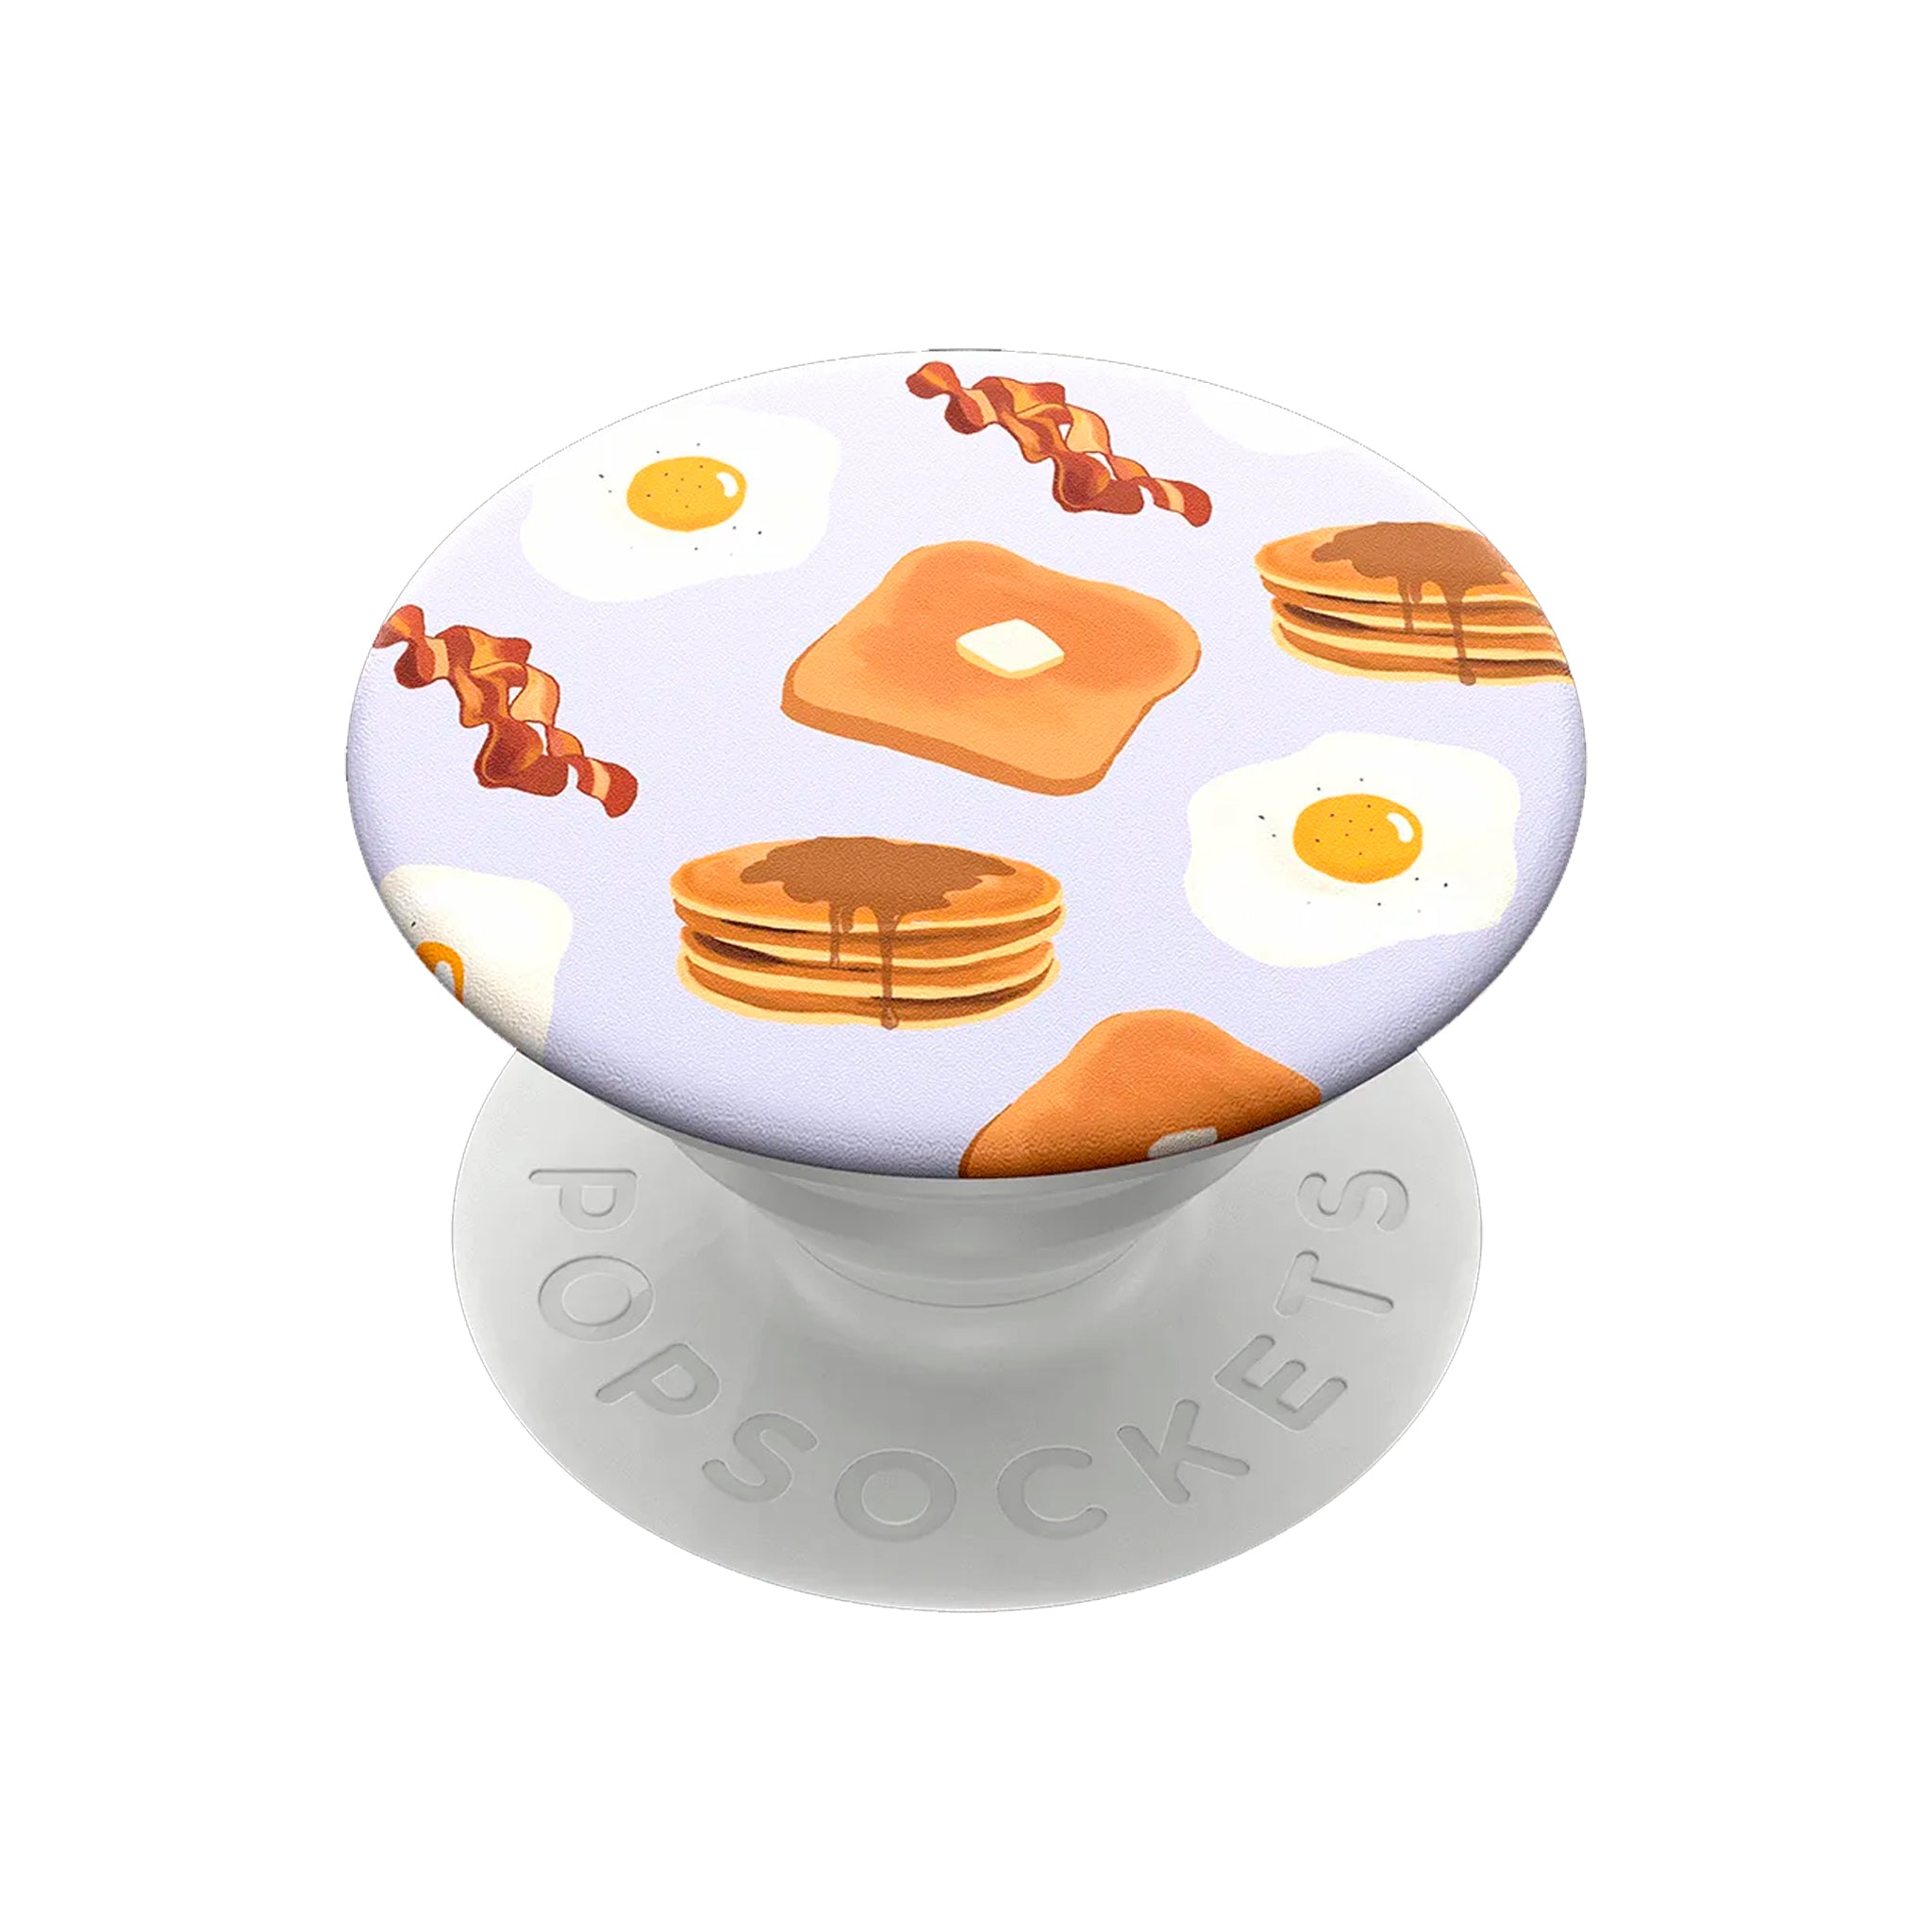 Popsockets - Popgrip Swappable Nature Device Stand And Grip - Brunch Bunch